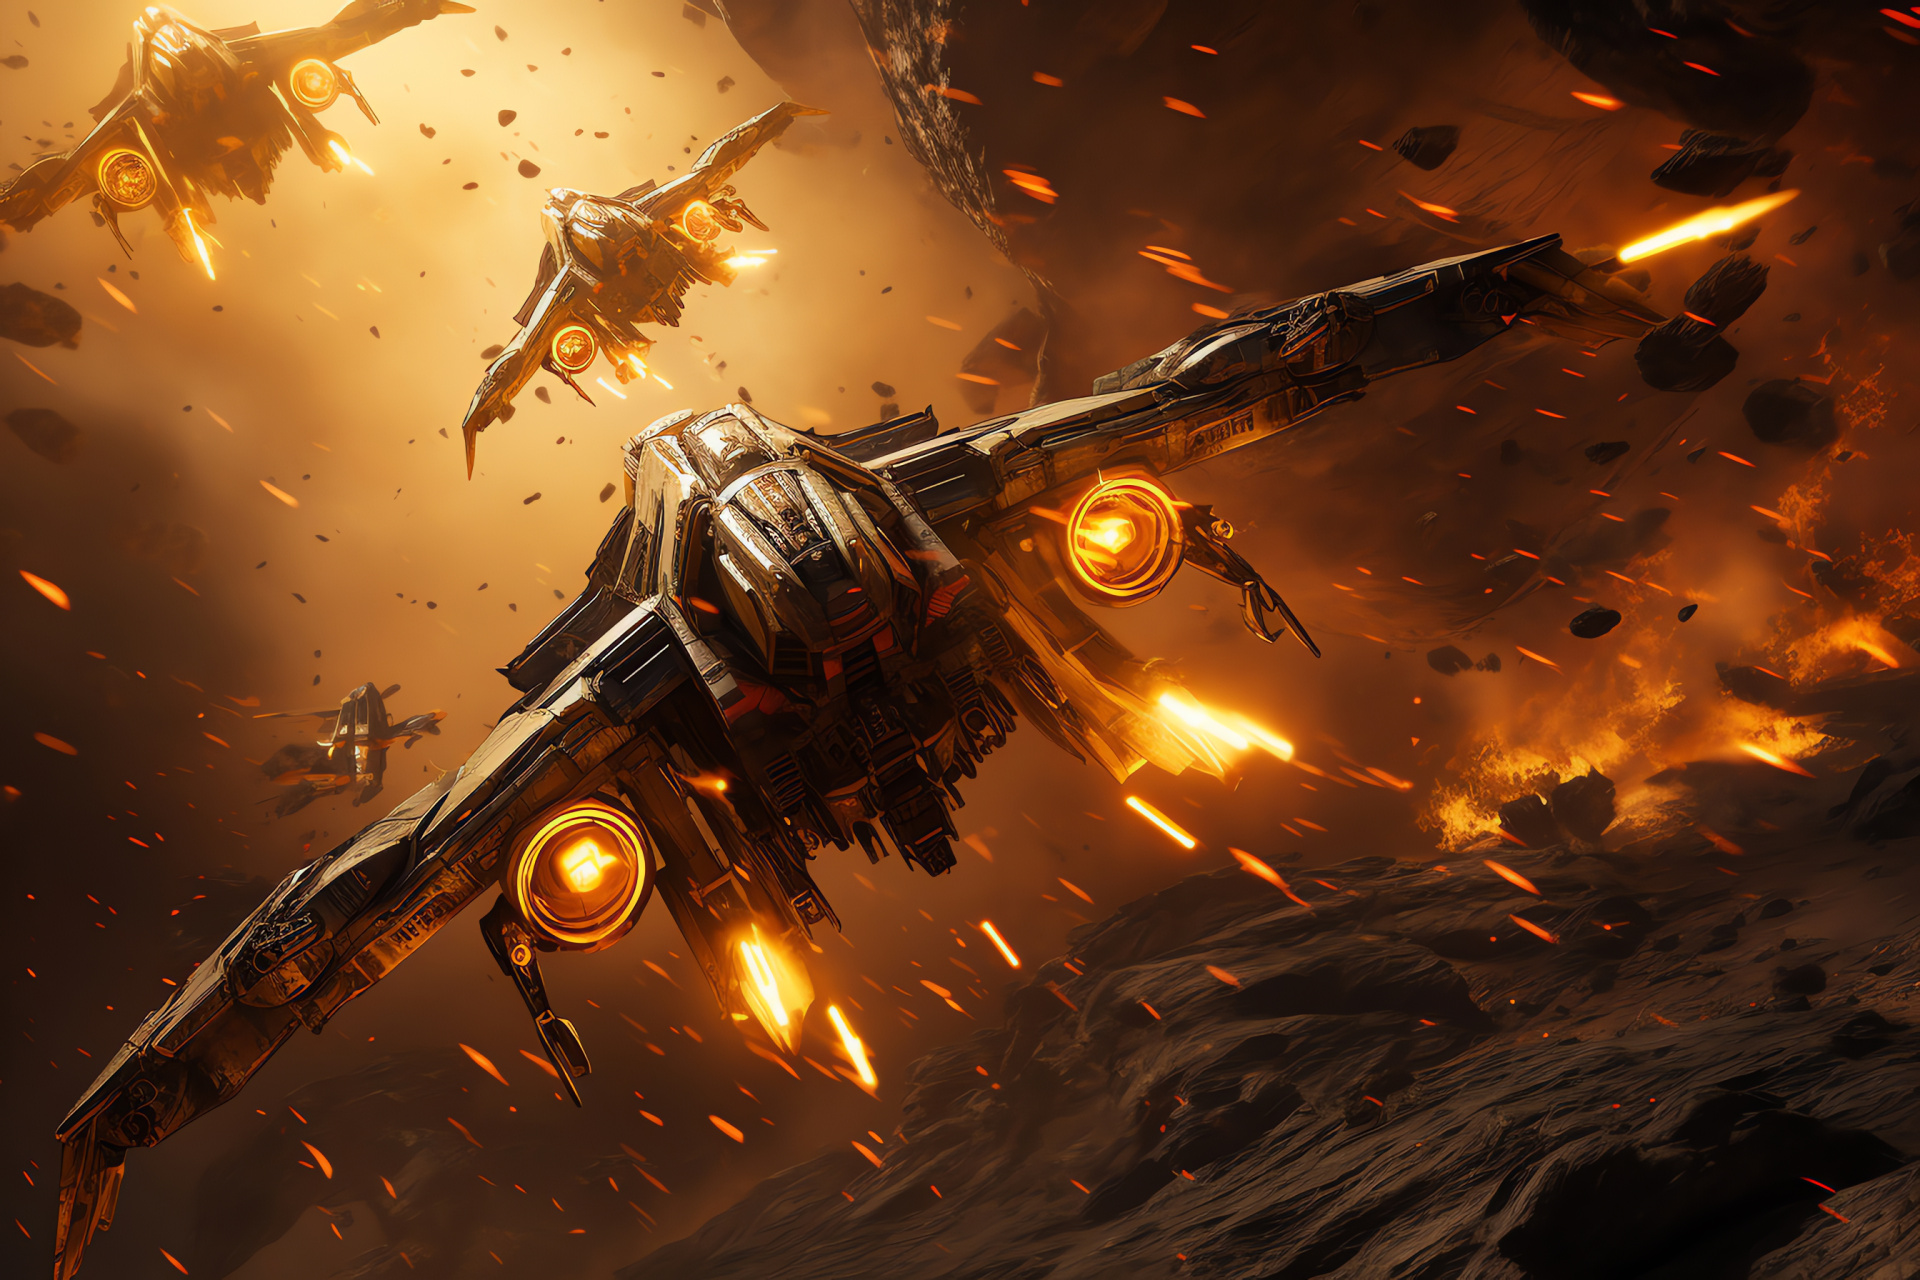 Stellar agression, Dynamic space expressions, Spacecraft dogfighting, Gold-hued explosions, Lethal combat, HD Desktop Image